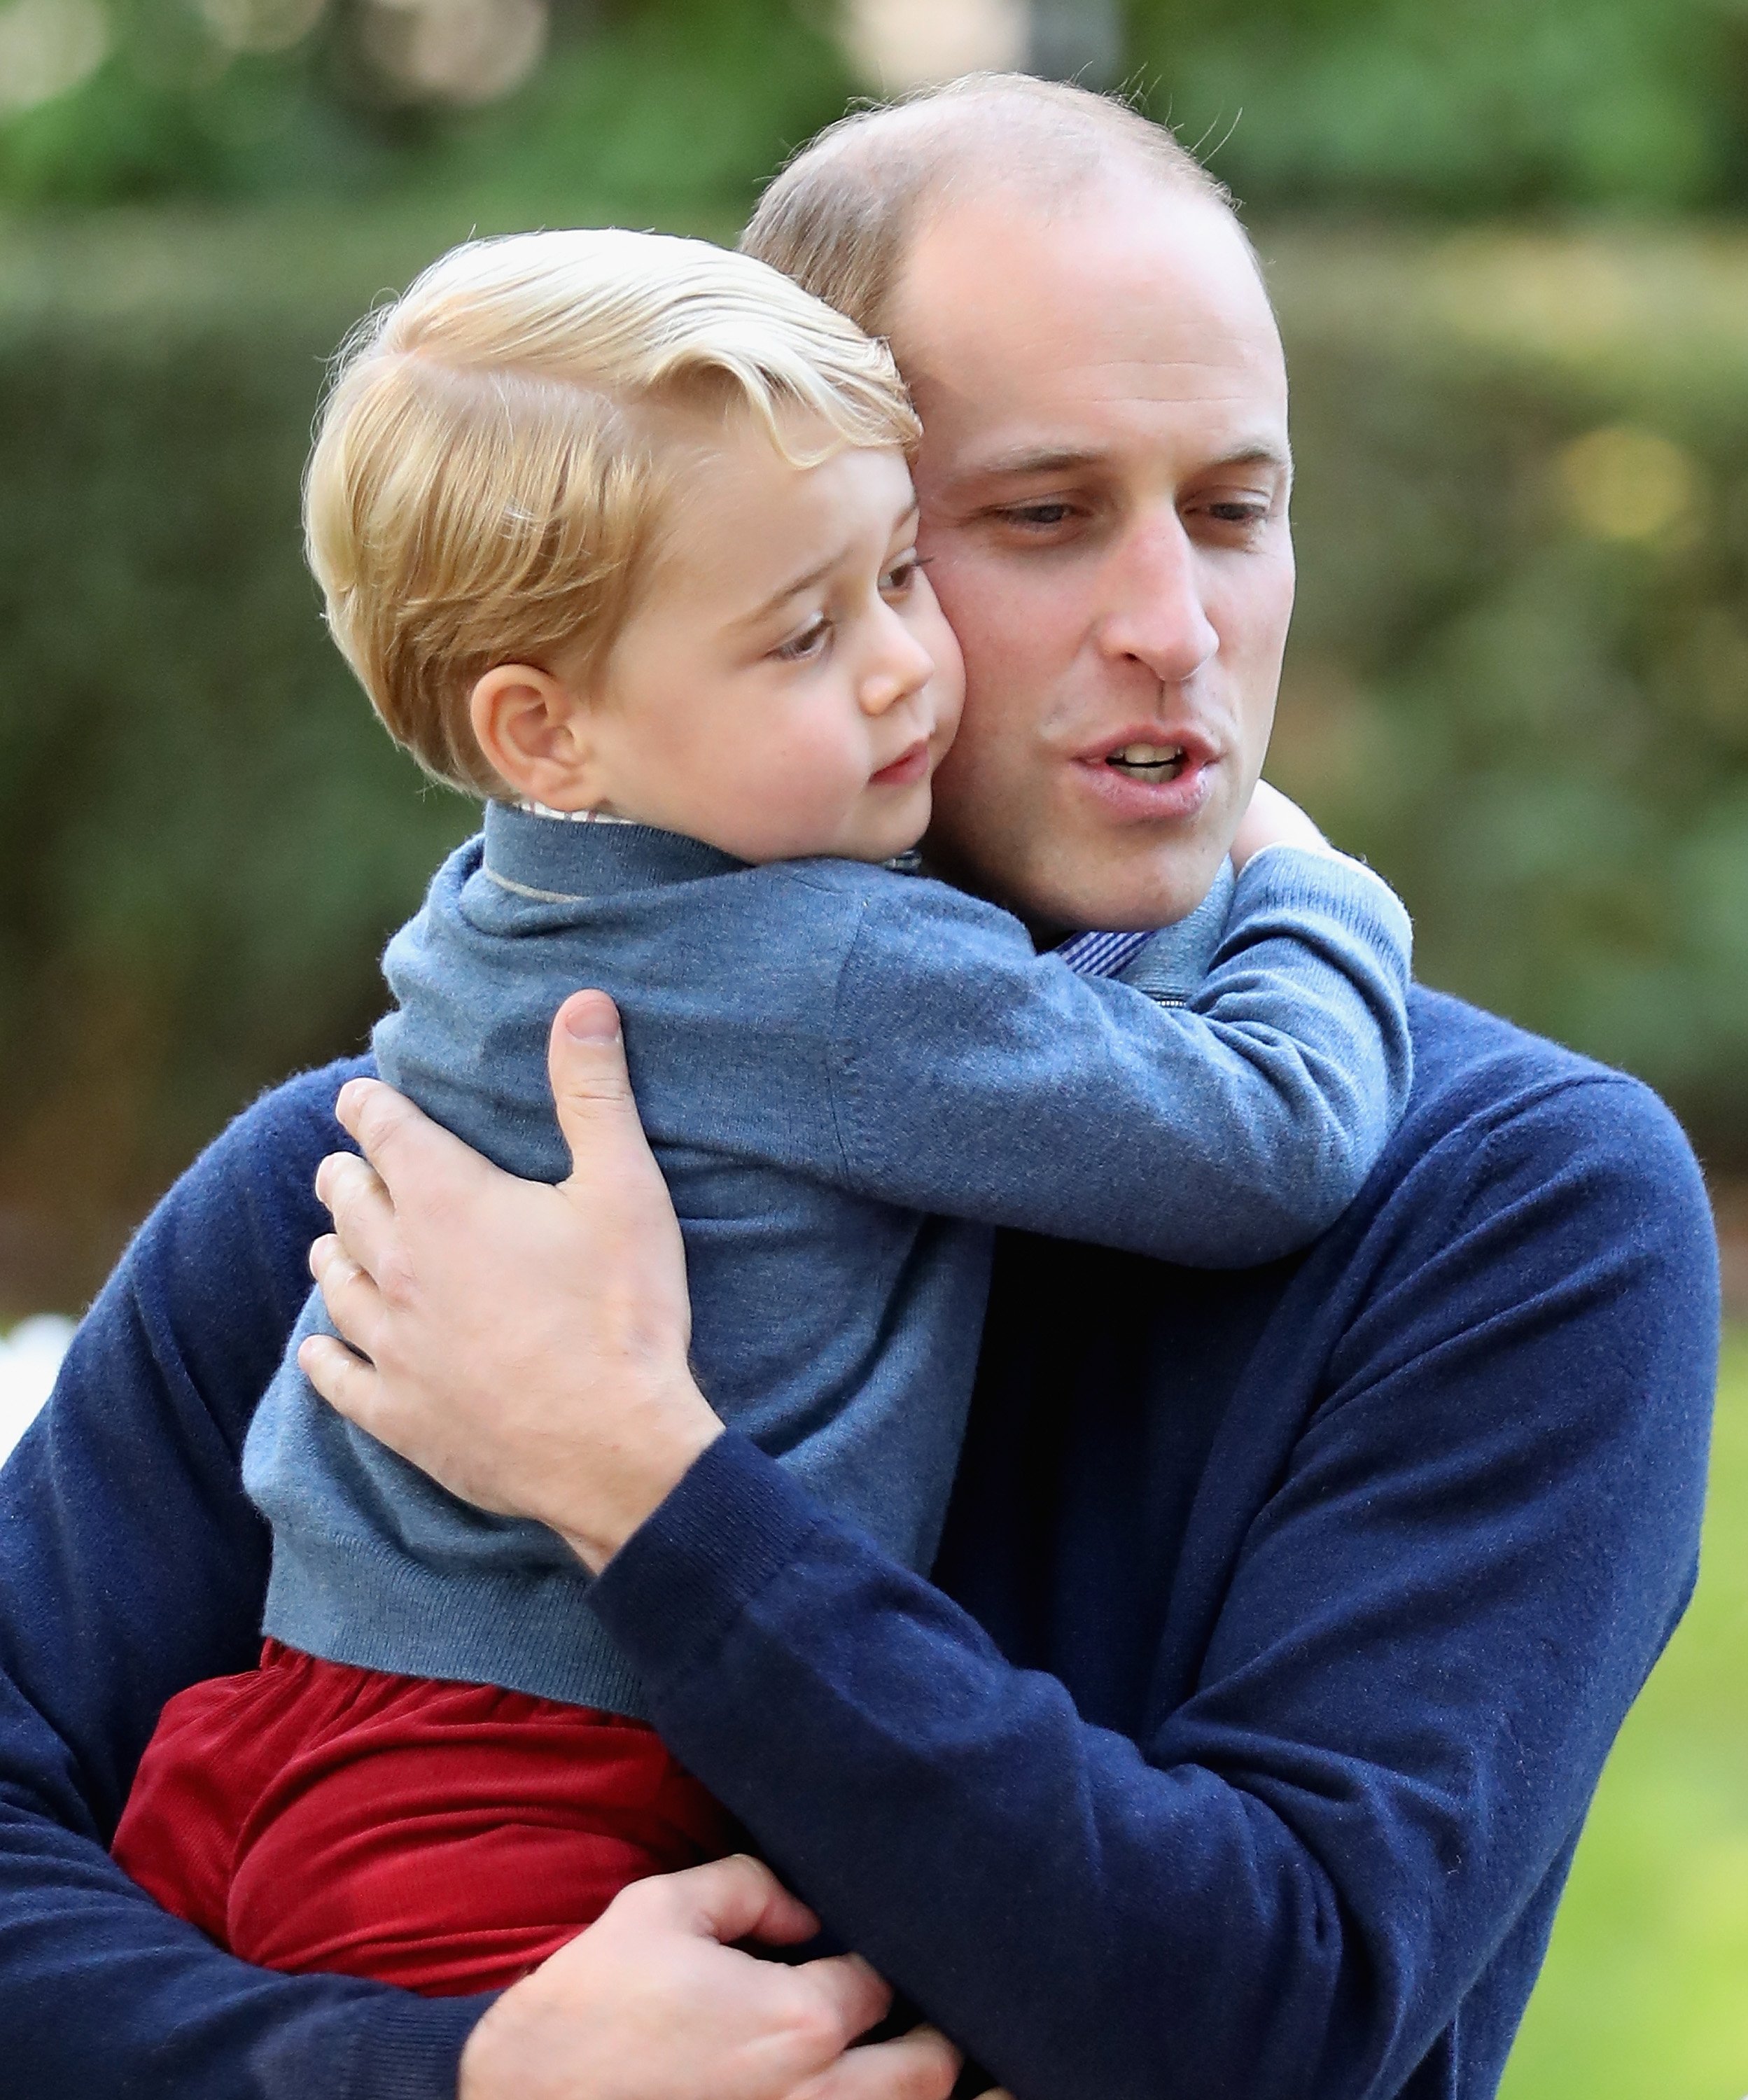 Prince George of Cambridge with Prince William, Duke of Cambridge at a children's party for Military families during the Royal Tour of Canada on September 29, 2016 in Victoria, Canada. | Source: Getty Images